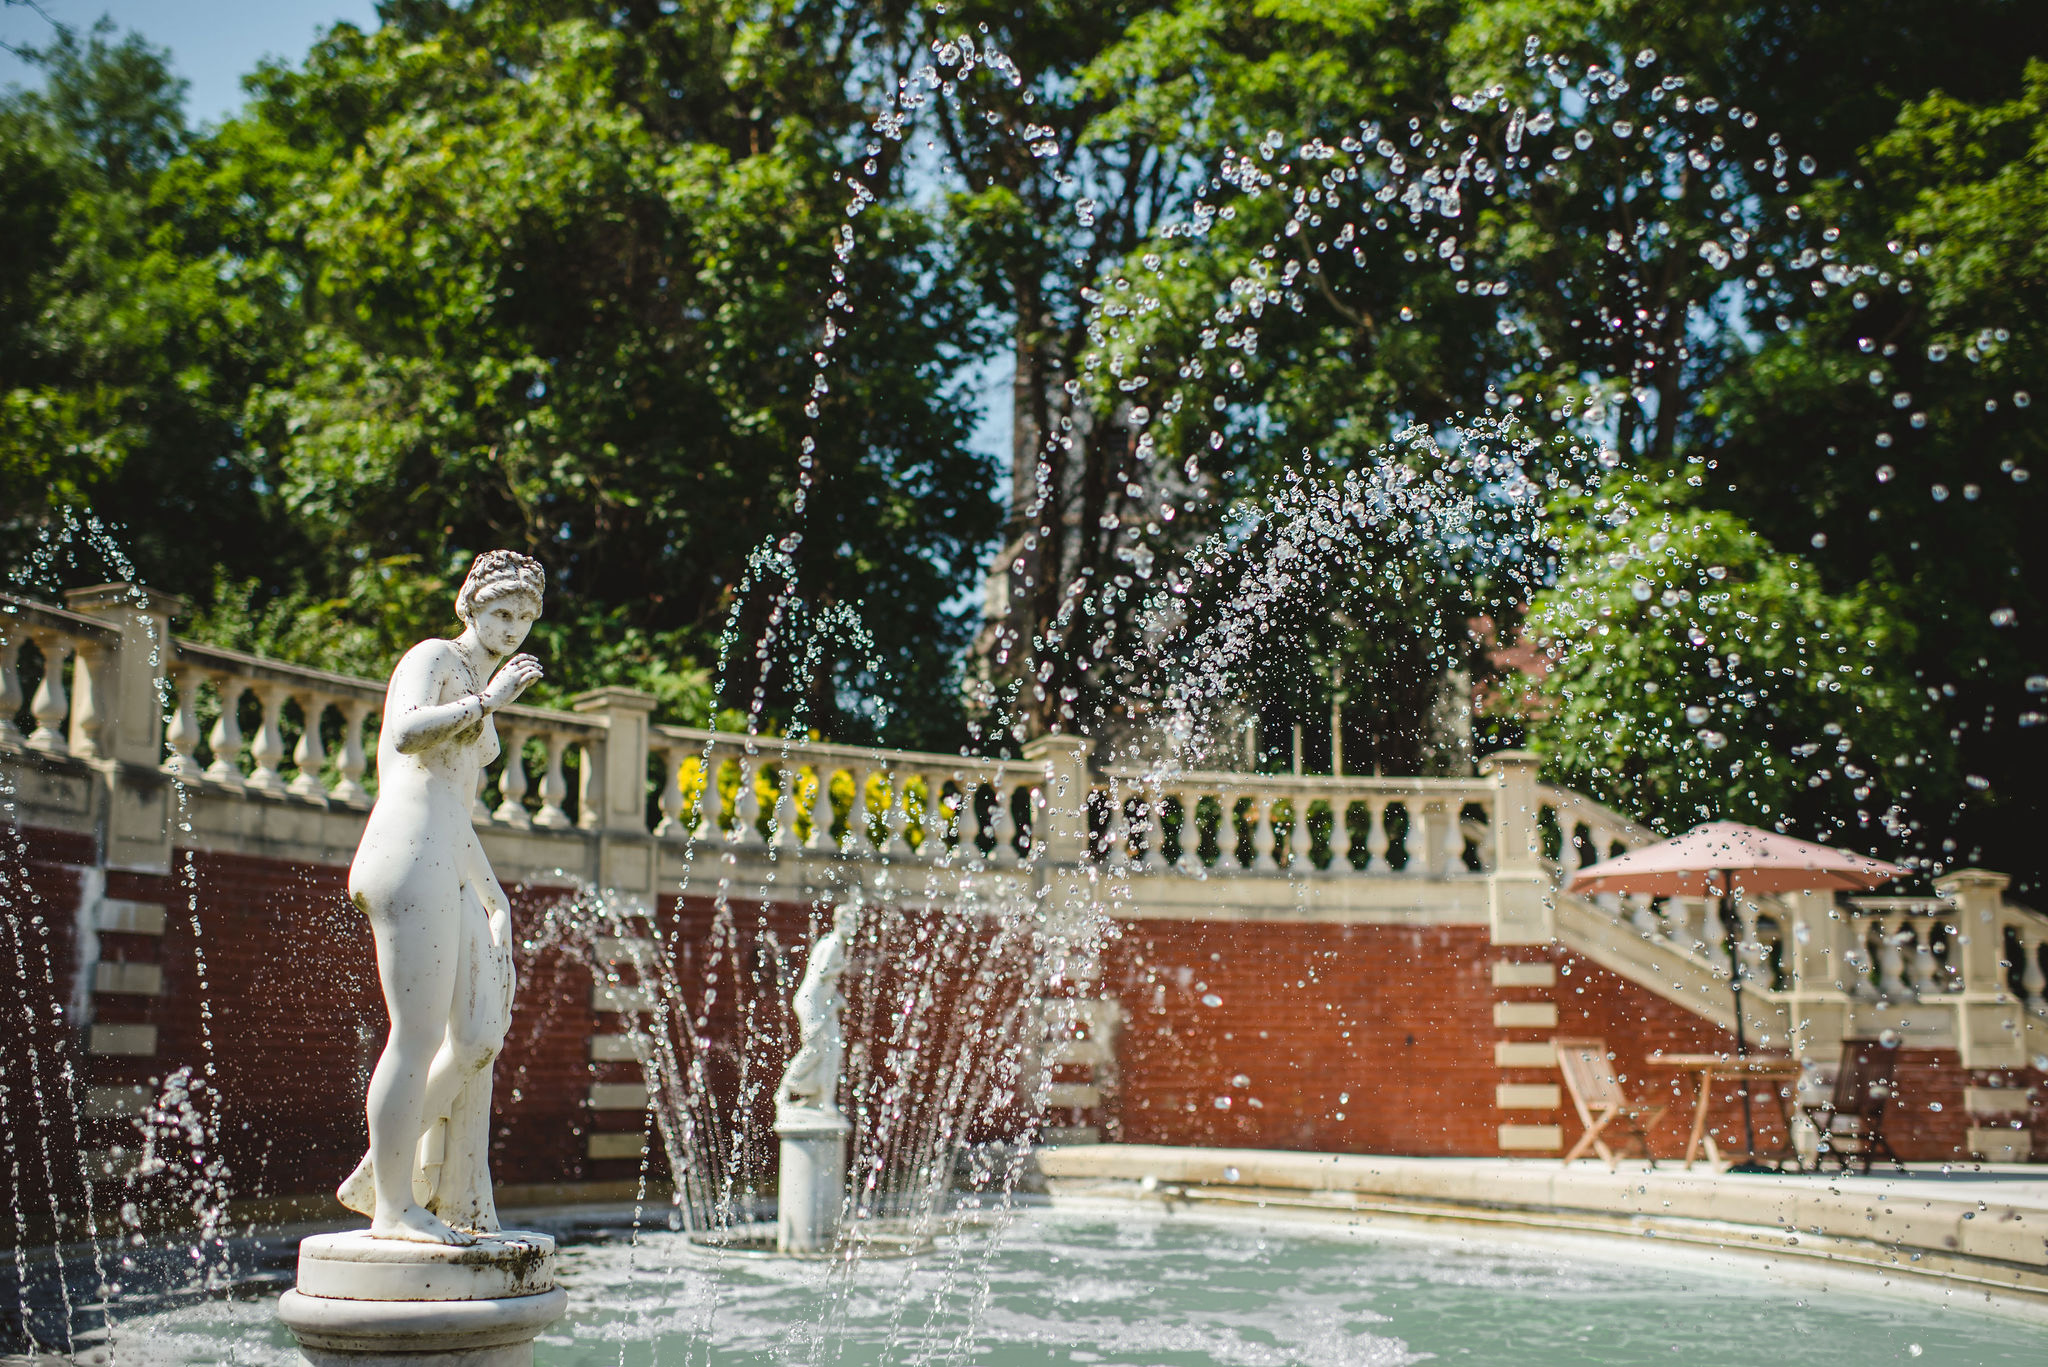 The stunning fountains at Fetcham Park